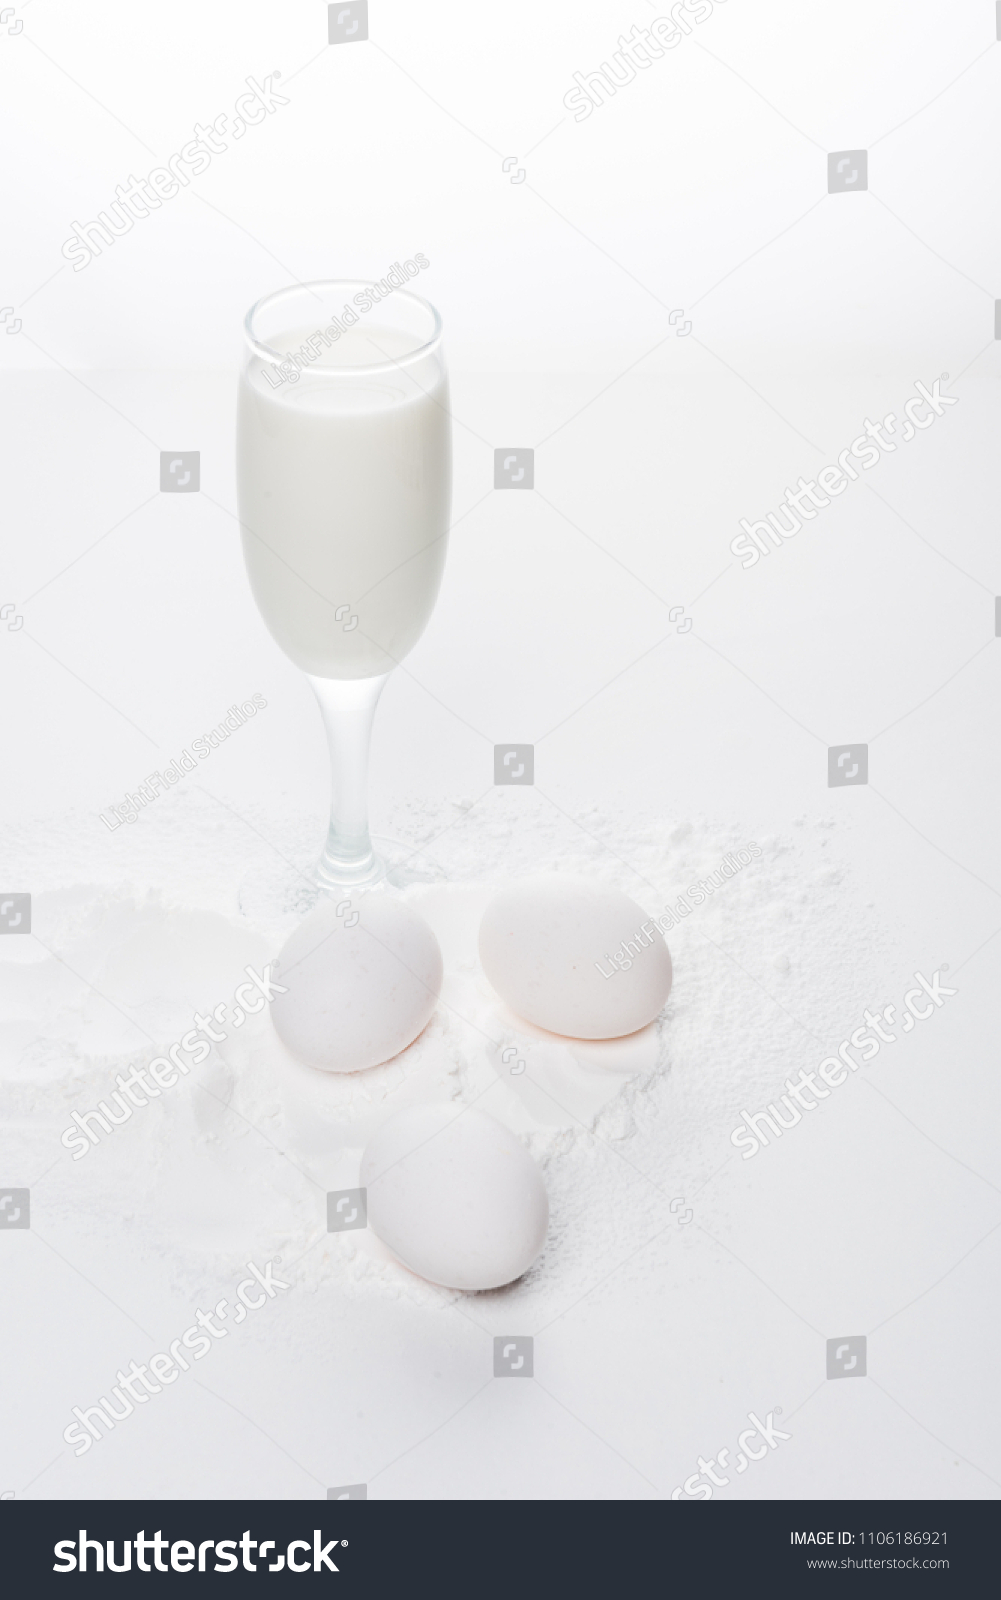 chicken eggs with flour and milk on white surface #1106186921